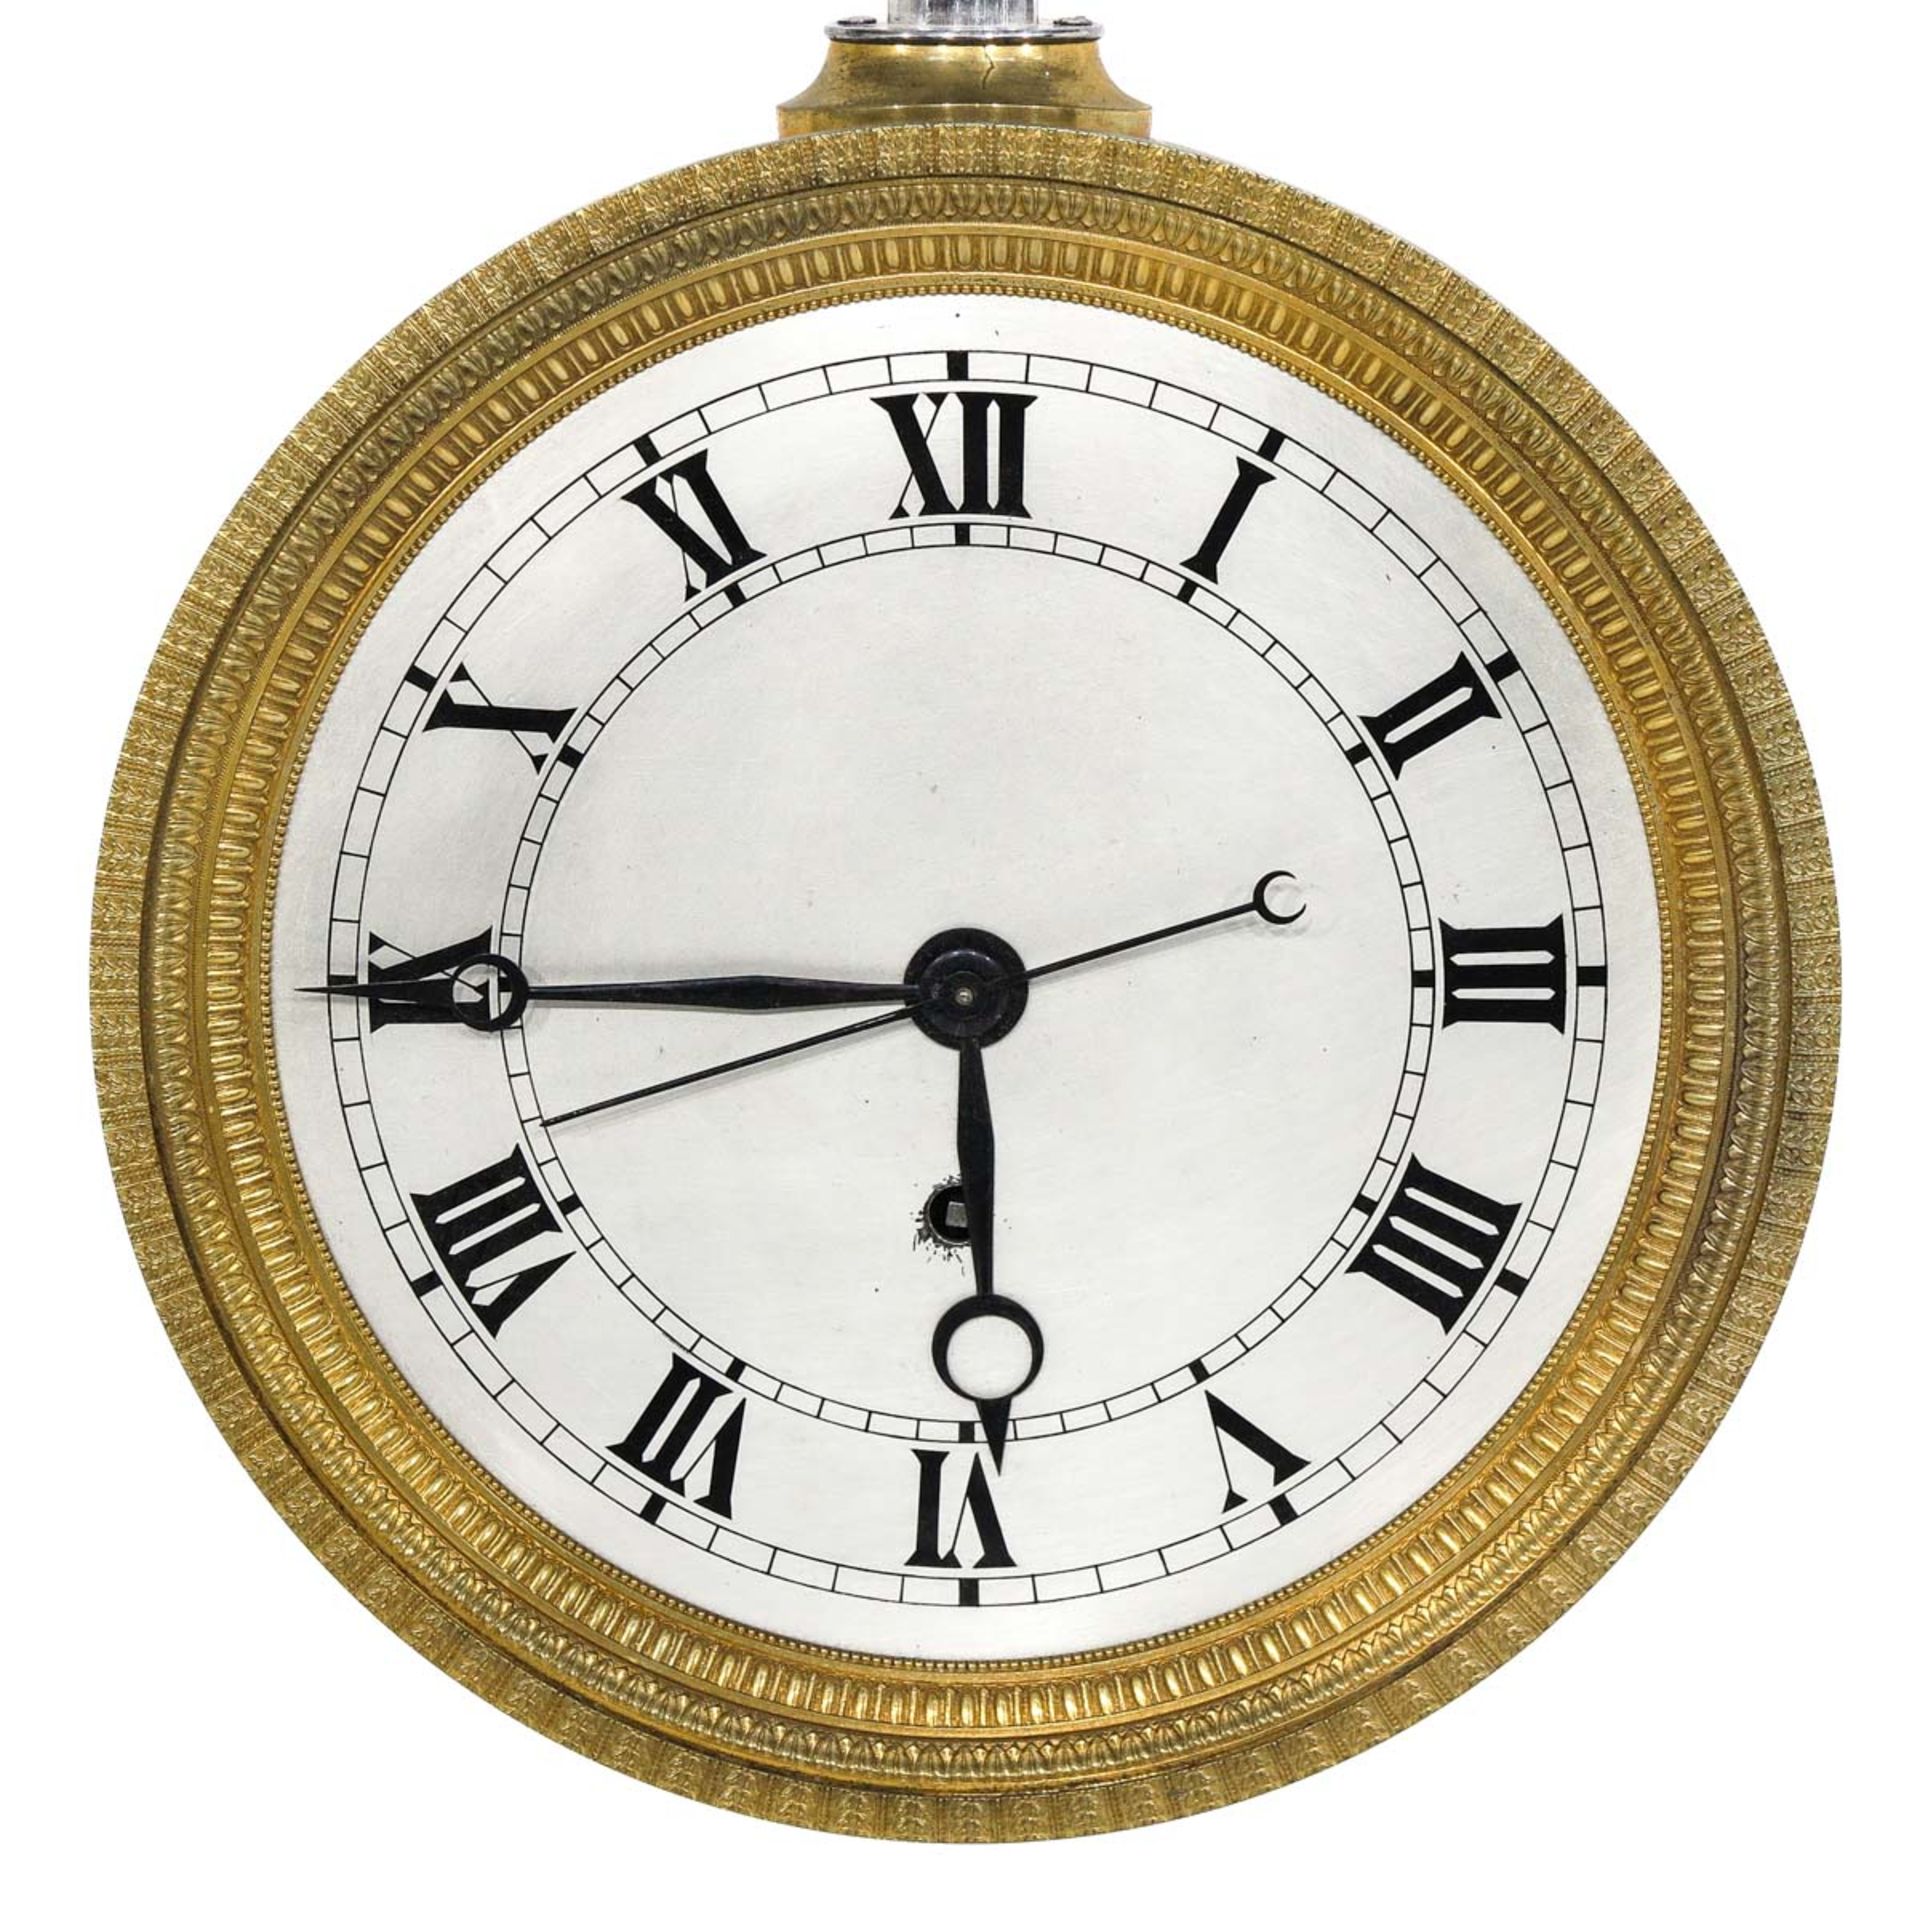 A 19th Century French Fire Gilt Wall Clock - Image 4 of 7